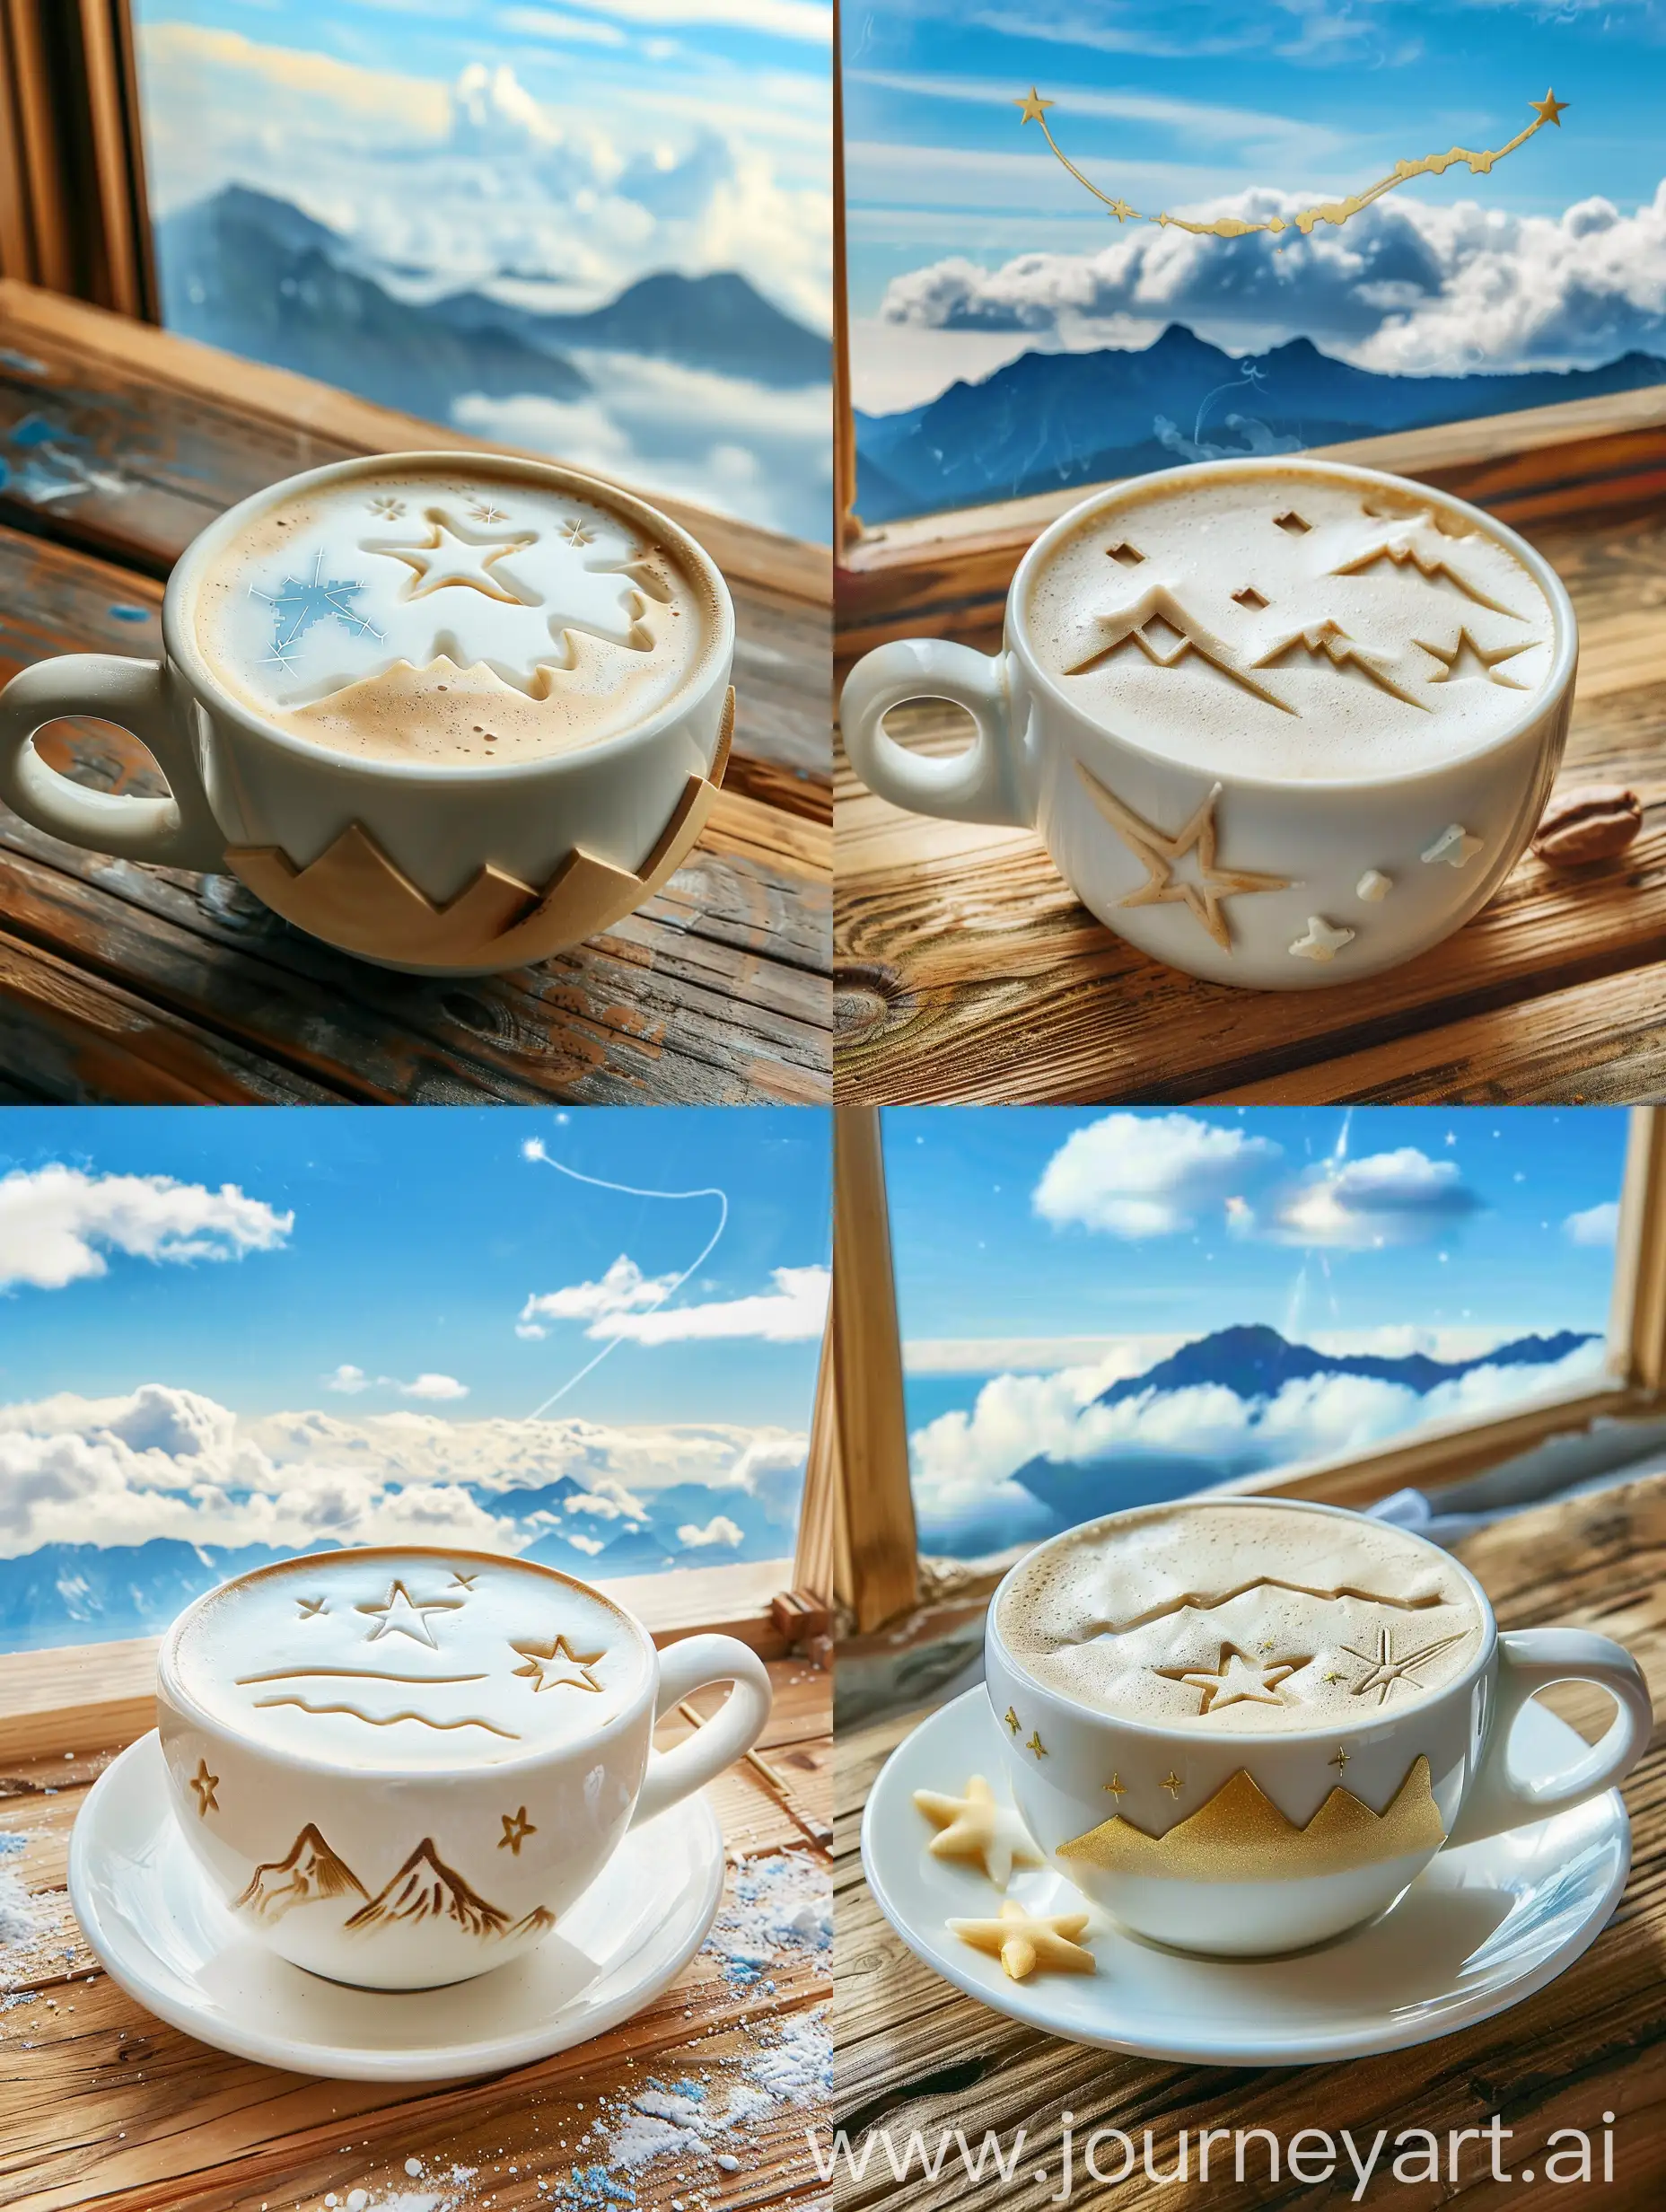 A cappuccino cup, with mountains, a star and a shooting star drawn in milk.  Wooden table, window, blue sky and clouds.